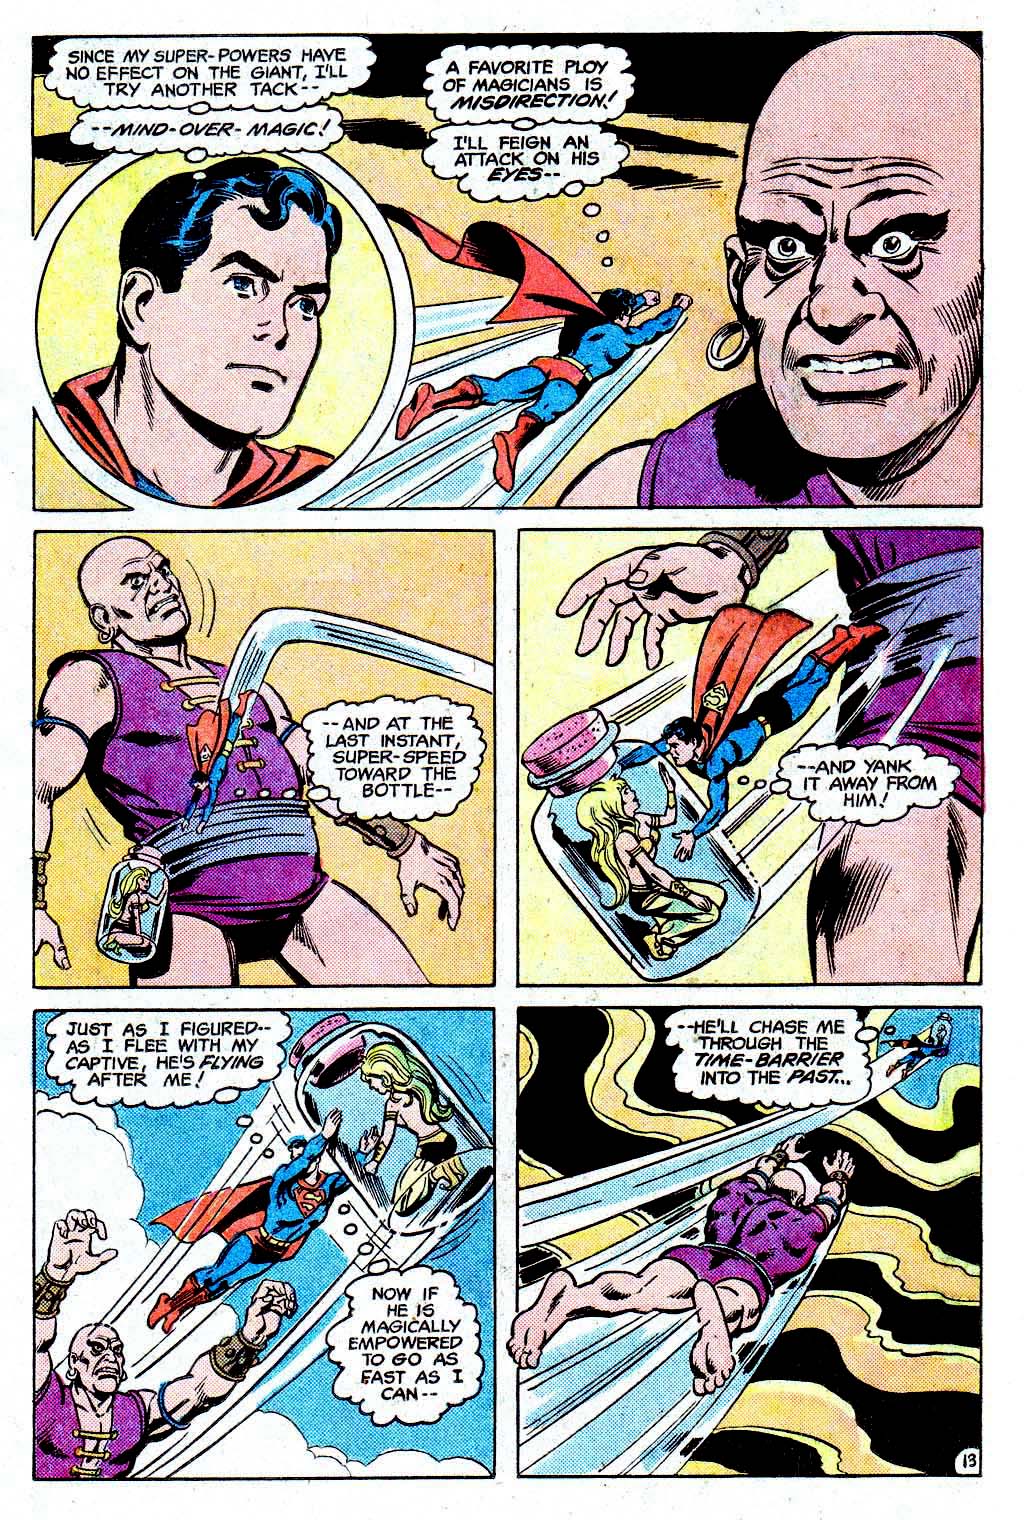 The New Adventures of Superboy 35 Page 17